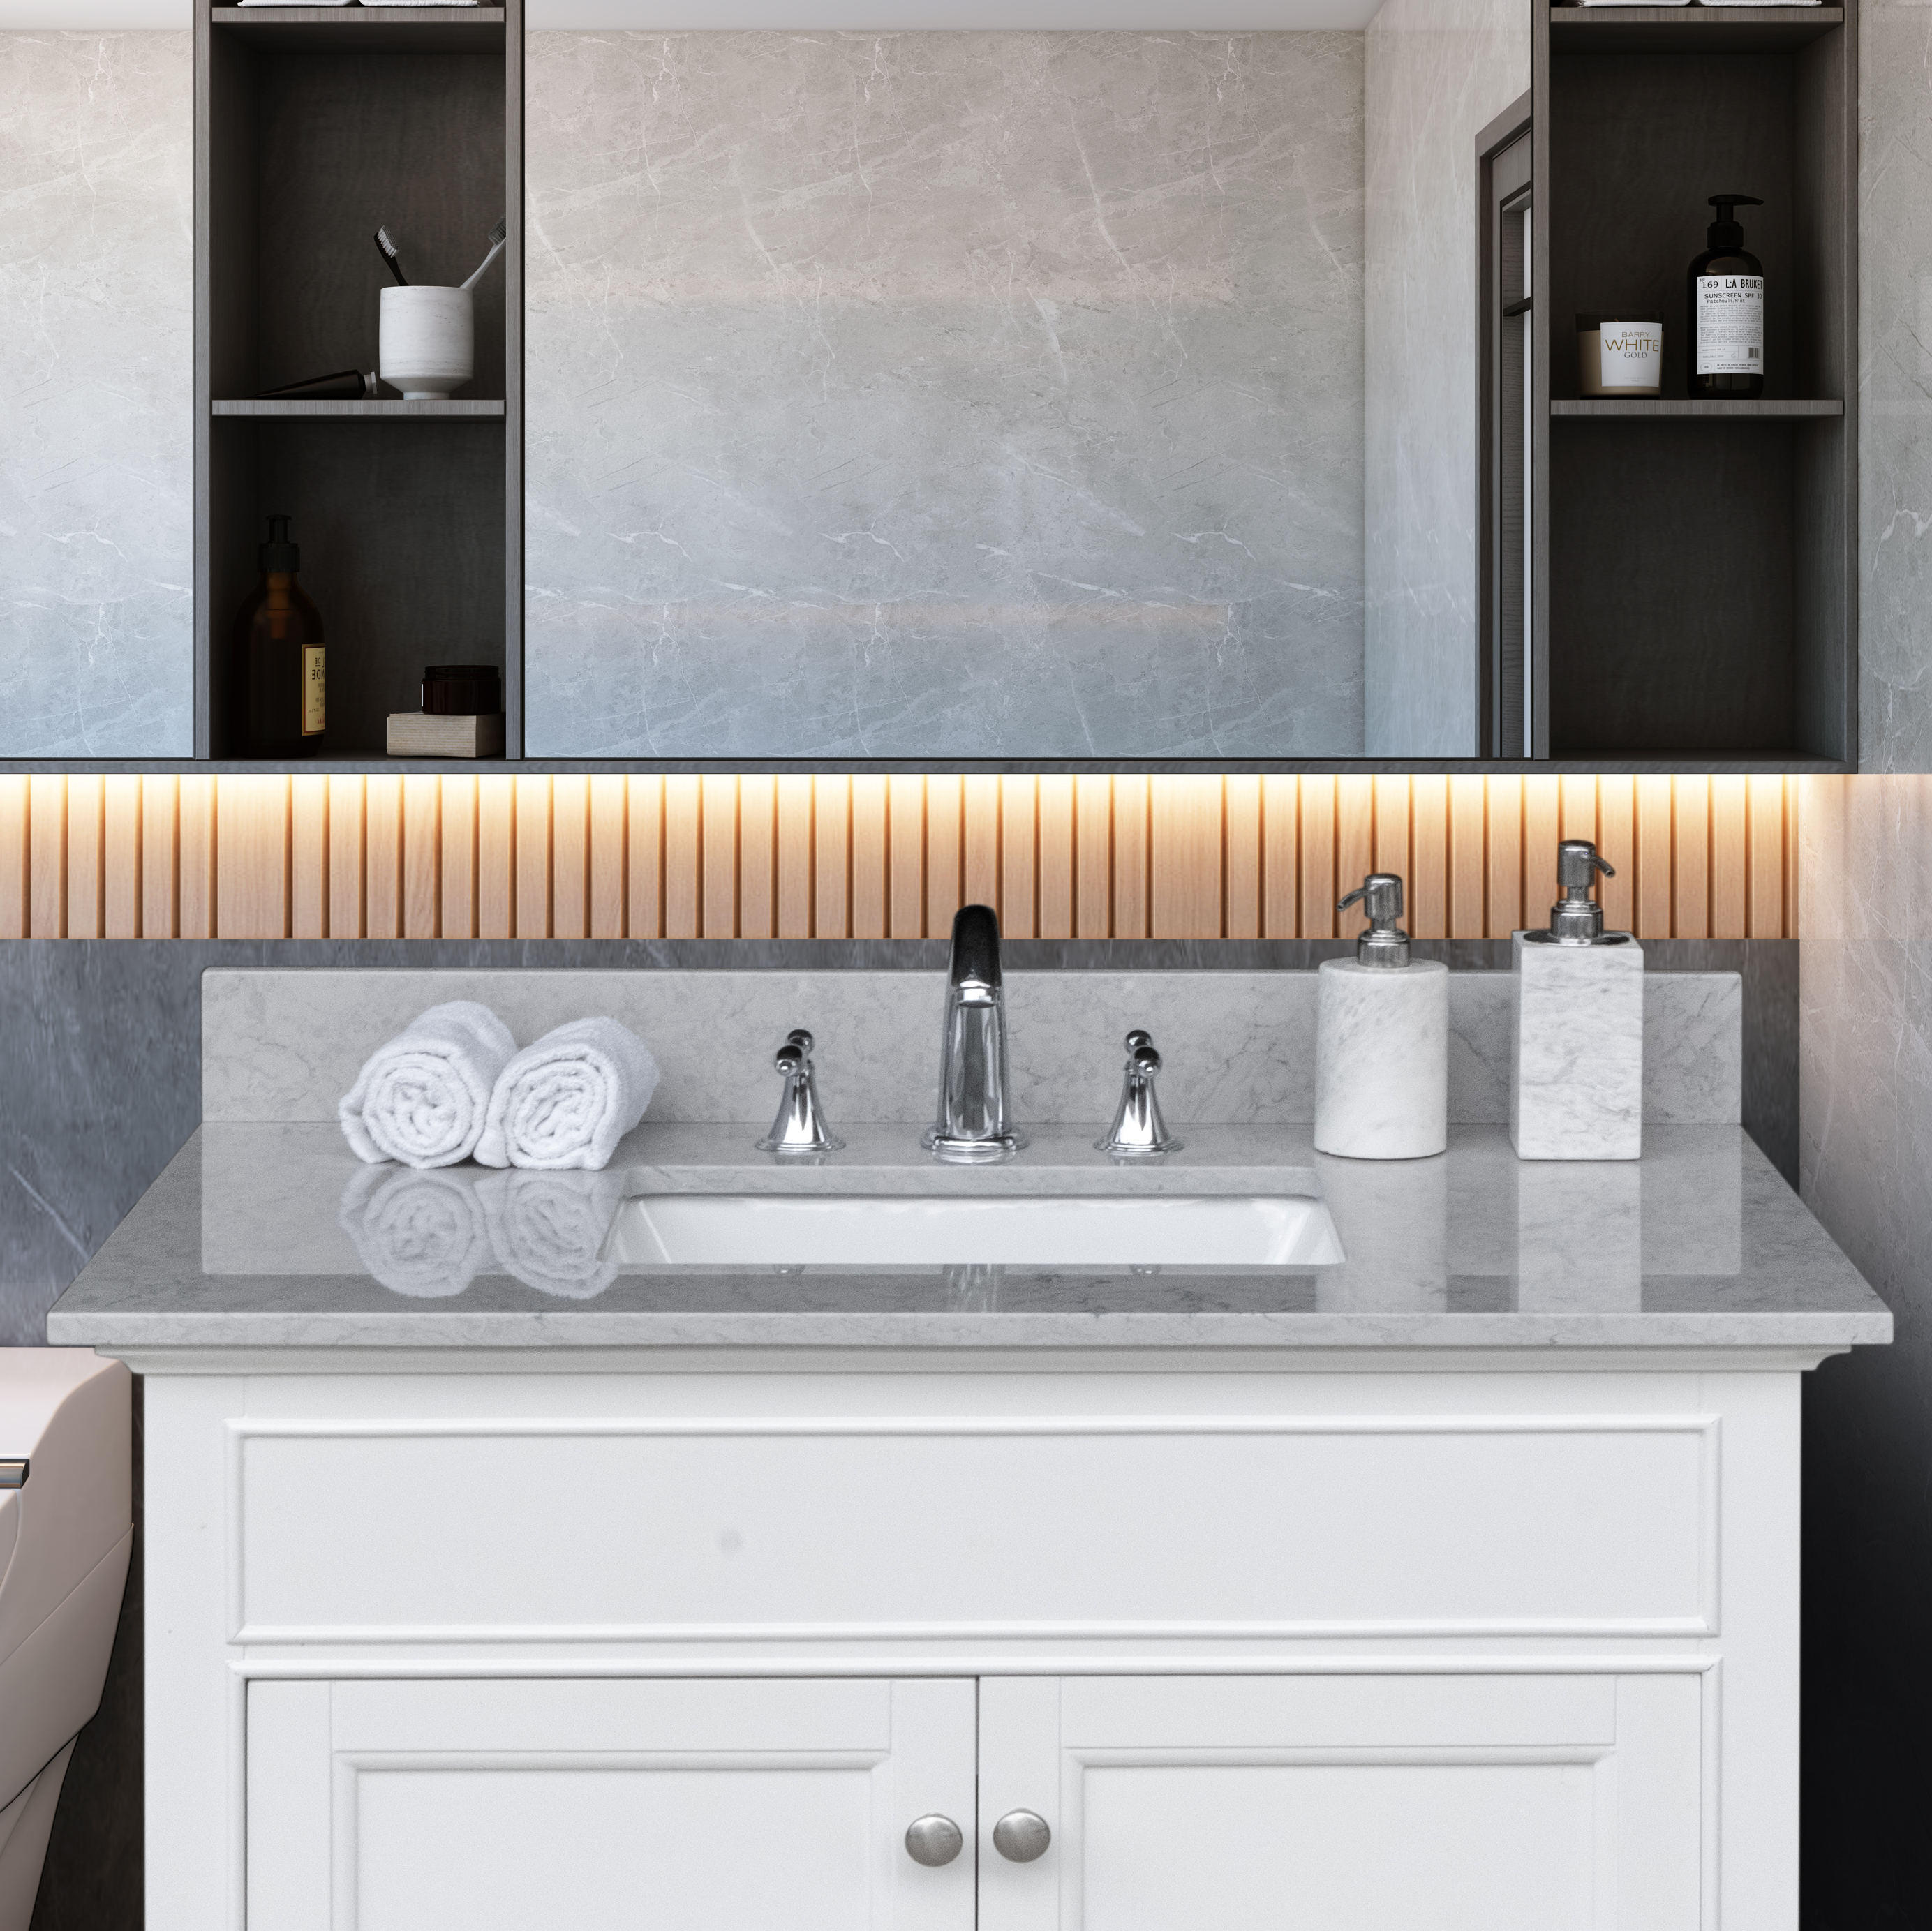 Montary 31 inches bathroom stone vanity top calacatta gray engineered marble color with undermount ceramic sink and 3 faucet hole with backsplash-Boyel Living